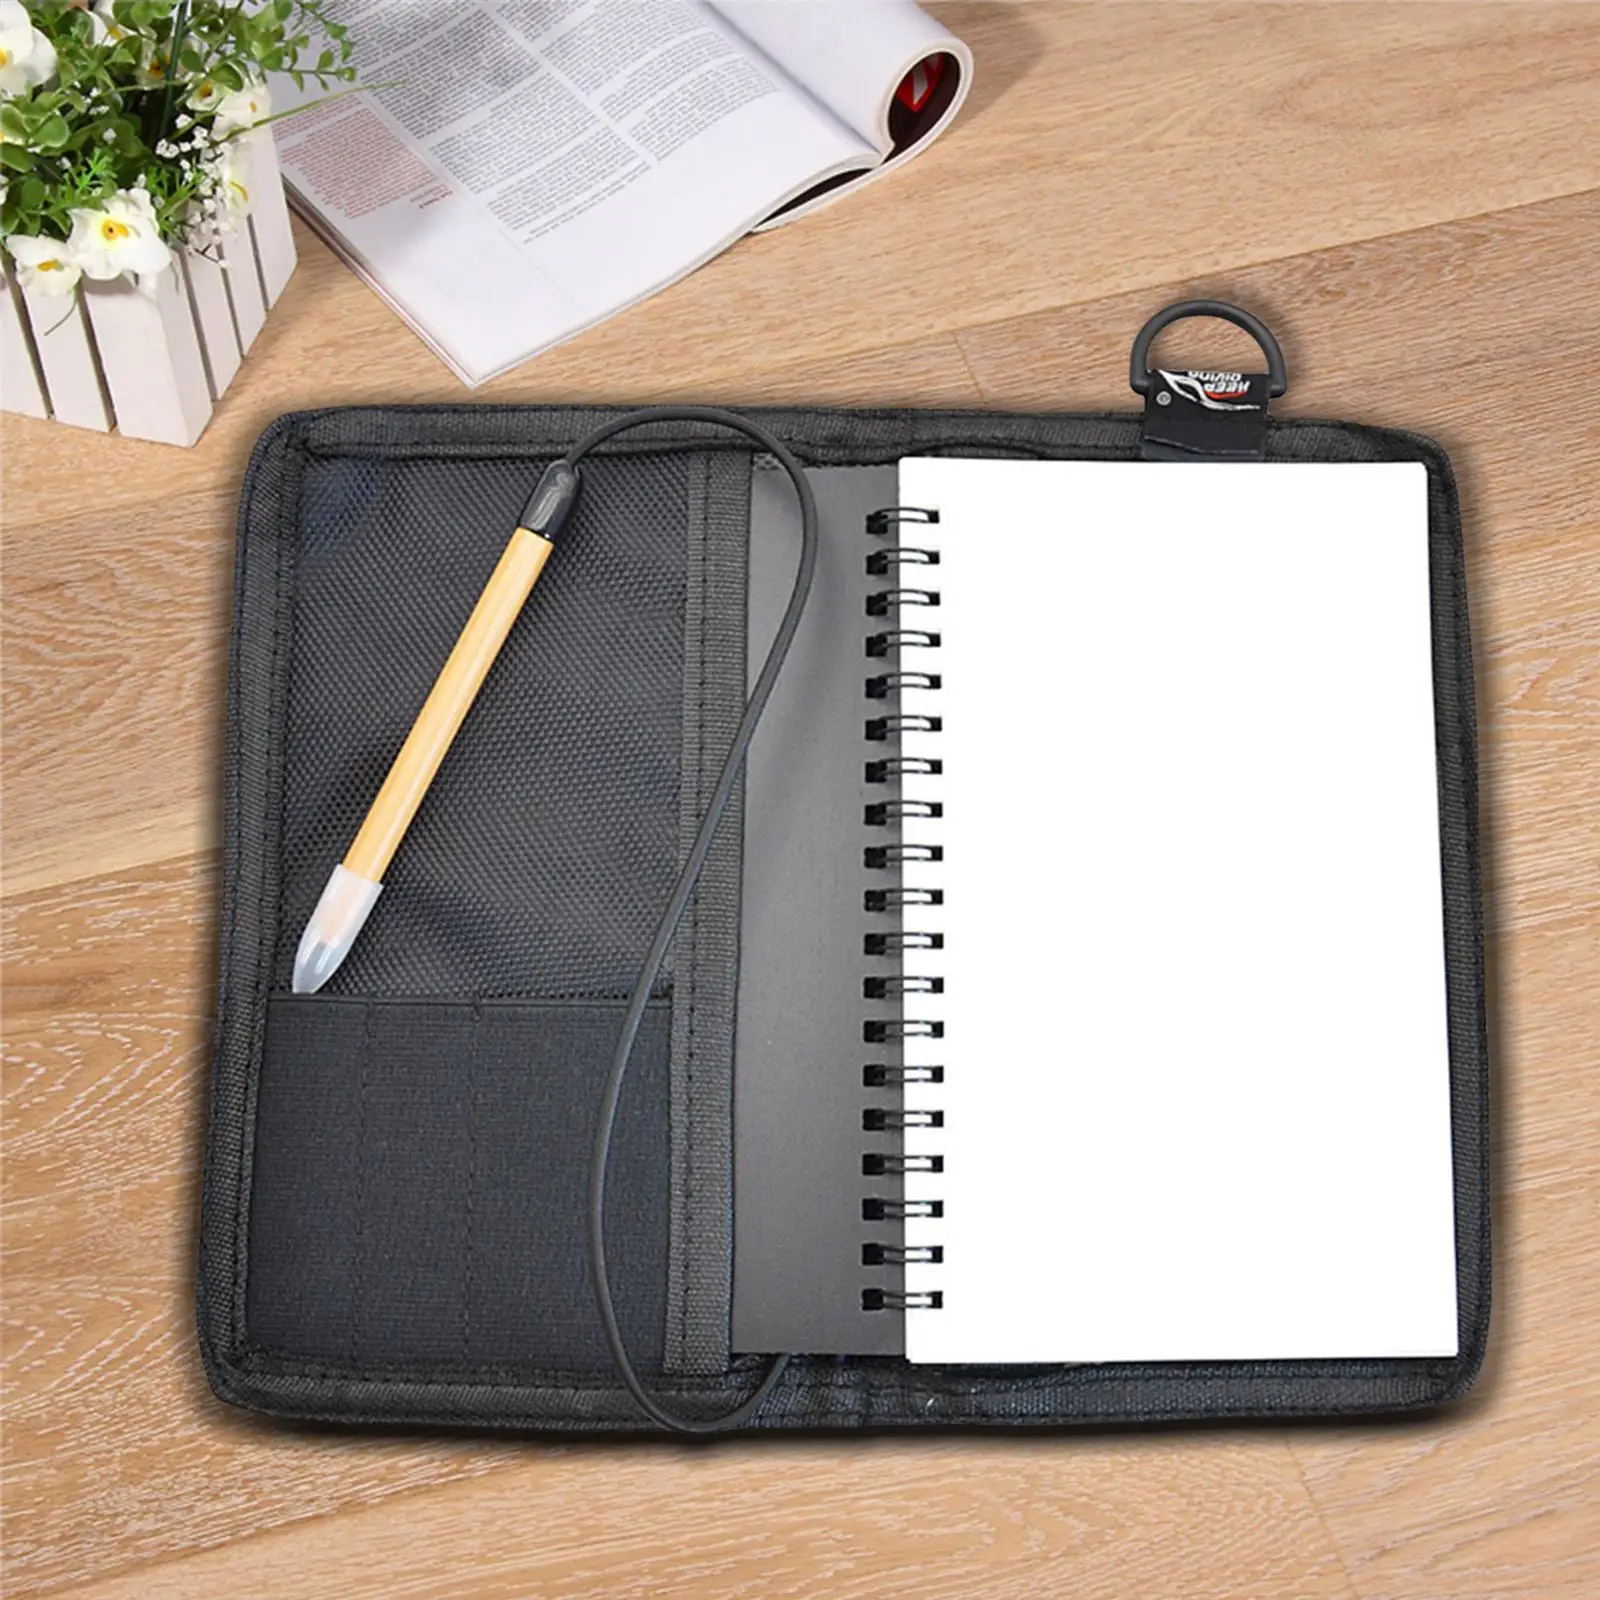 Scuba Underwater Dive Writing Notebook with Graphite Pencil for Diving Swimming Equipment